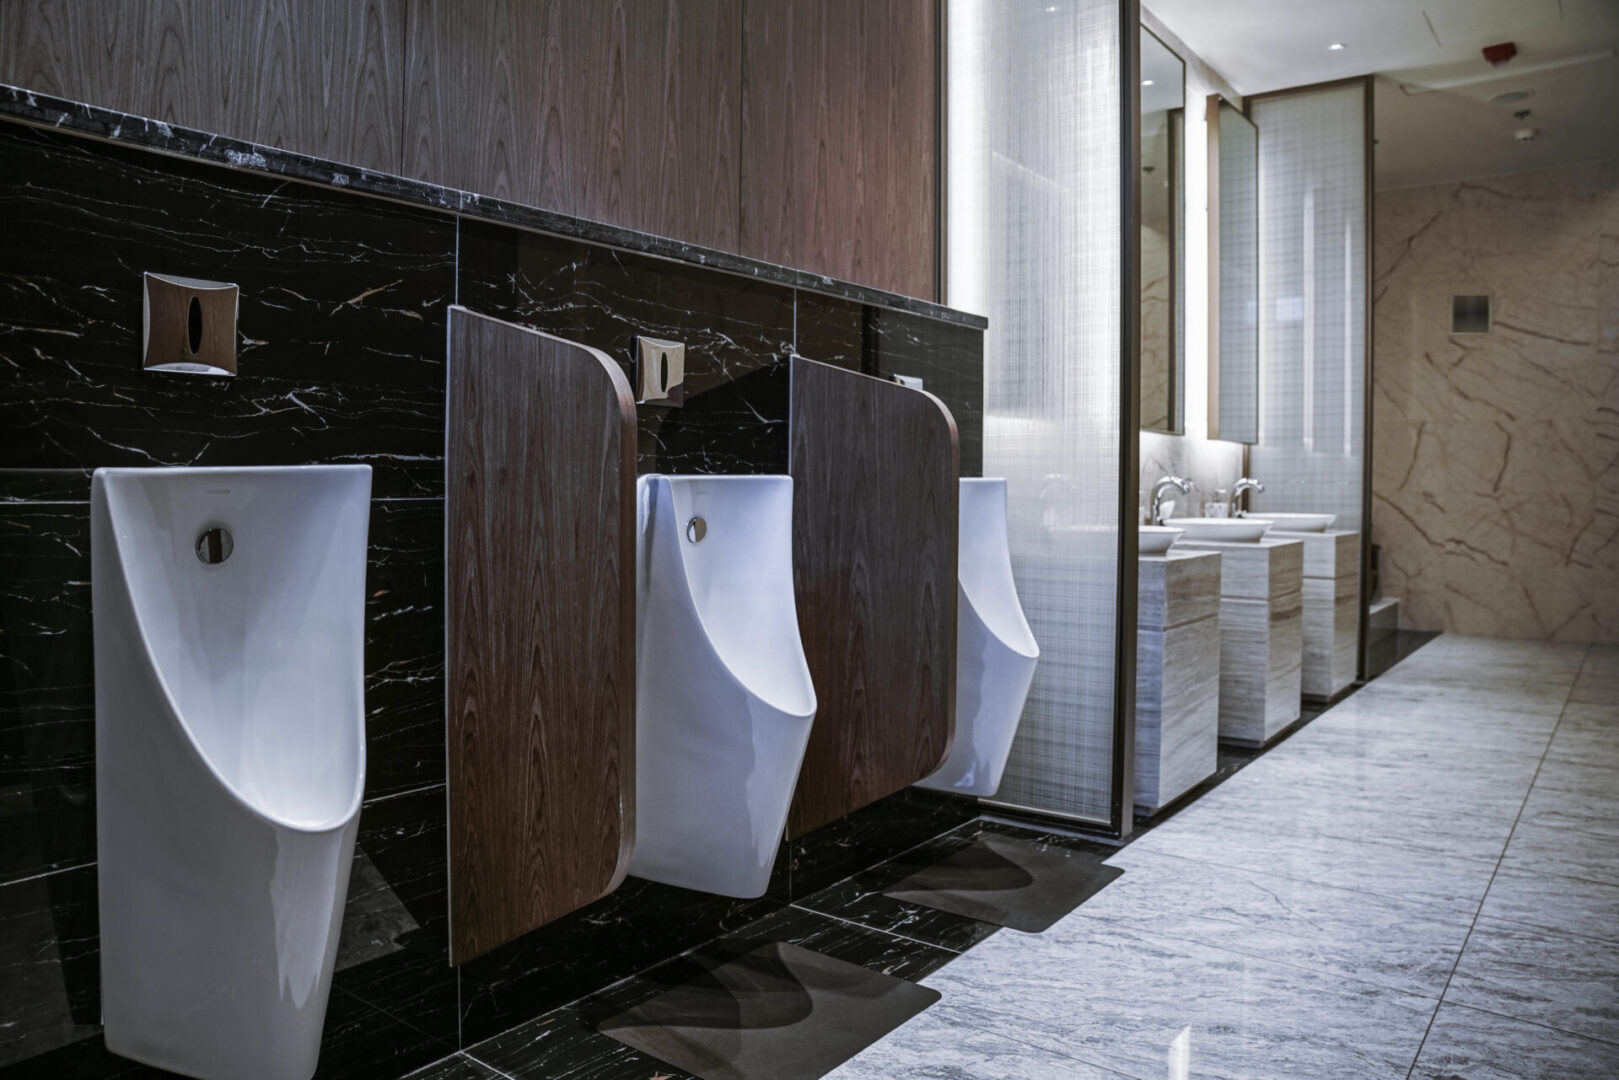 A row of urinals in a bathroom with marble walls.